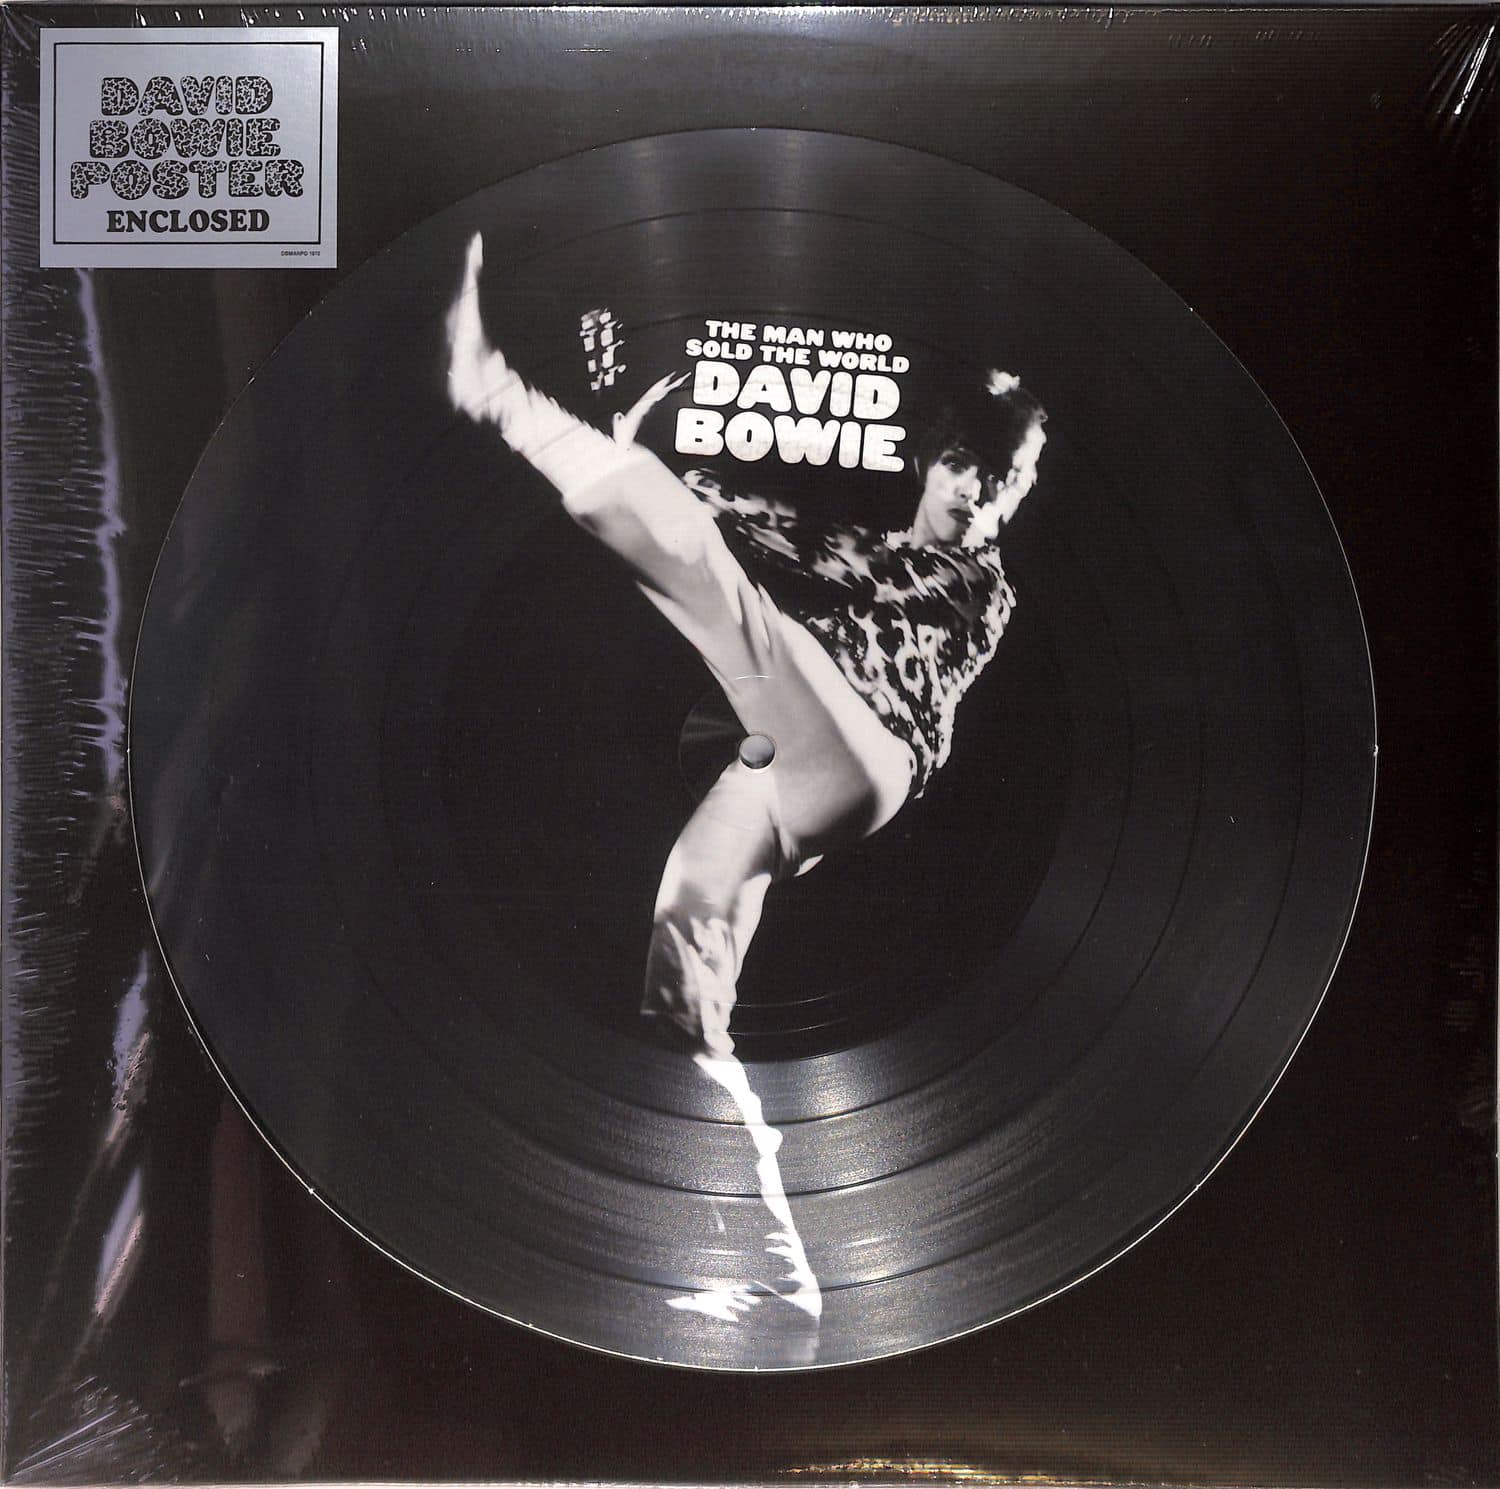 David Bowie - THE MAN WHO SOLD THE WORLD 